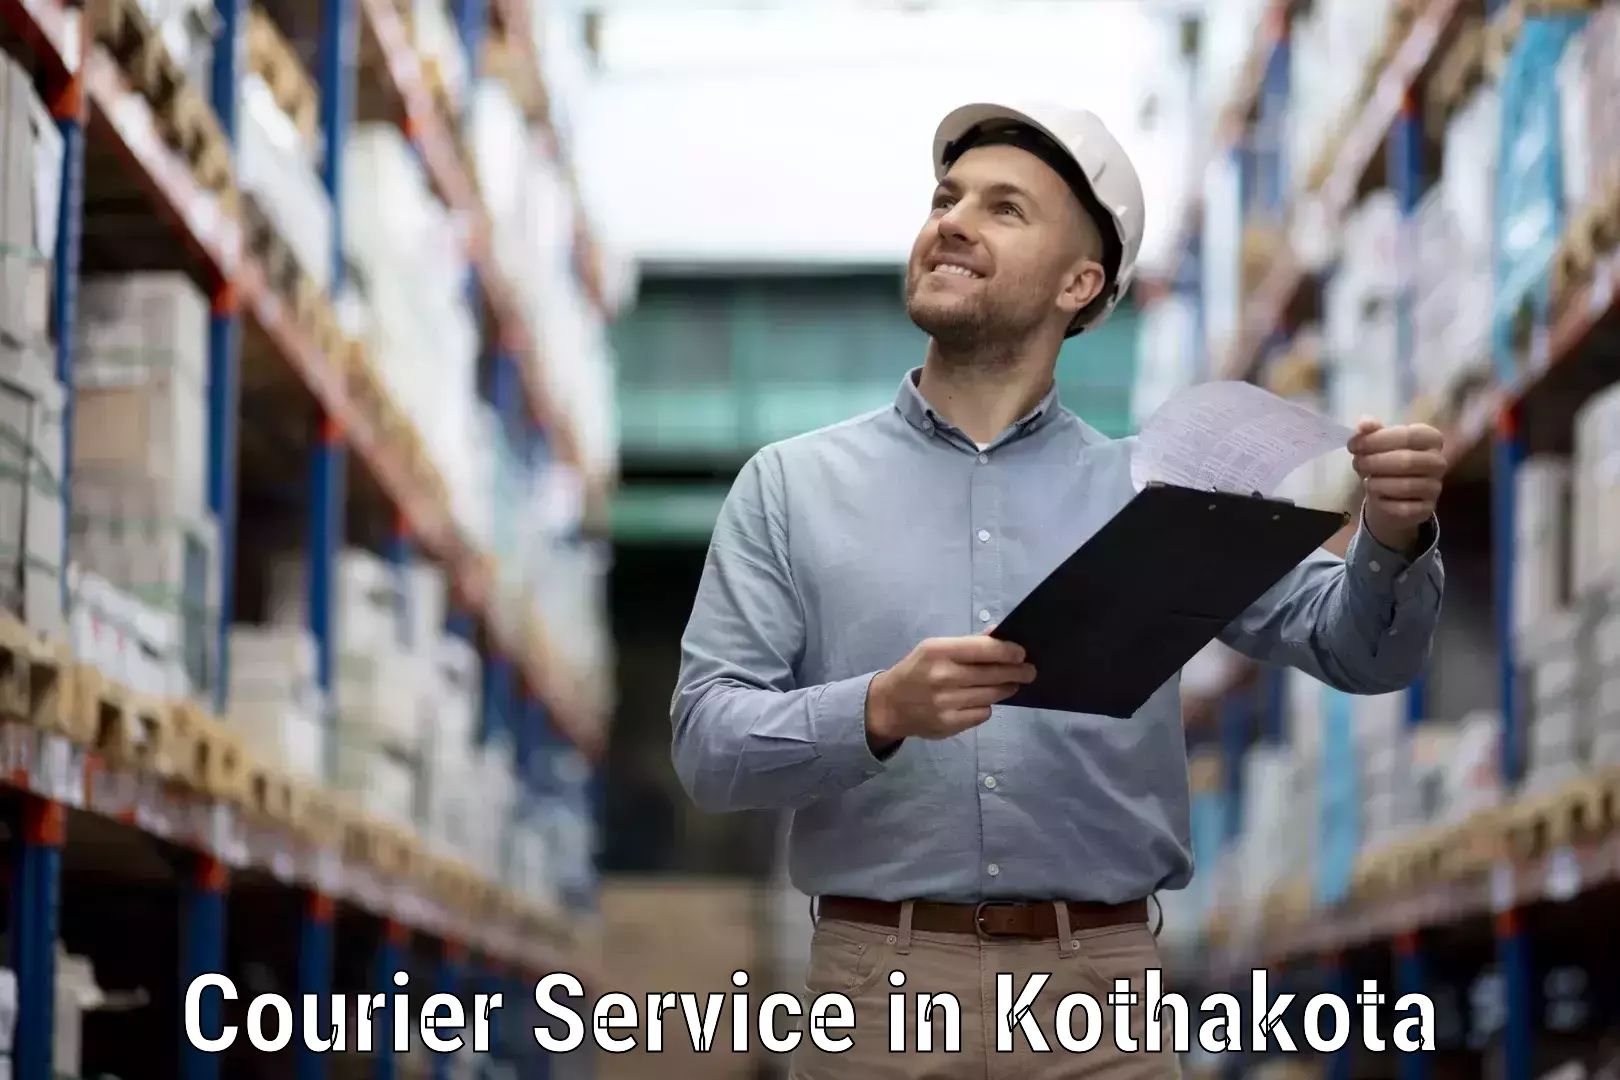 Reliable courier service in Kothakota